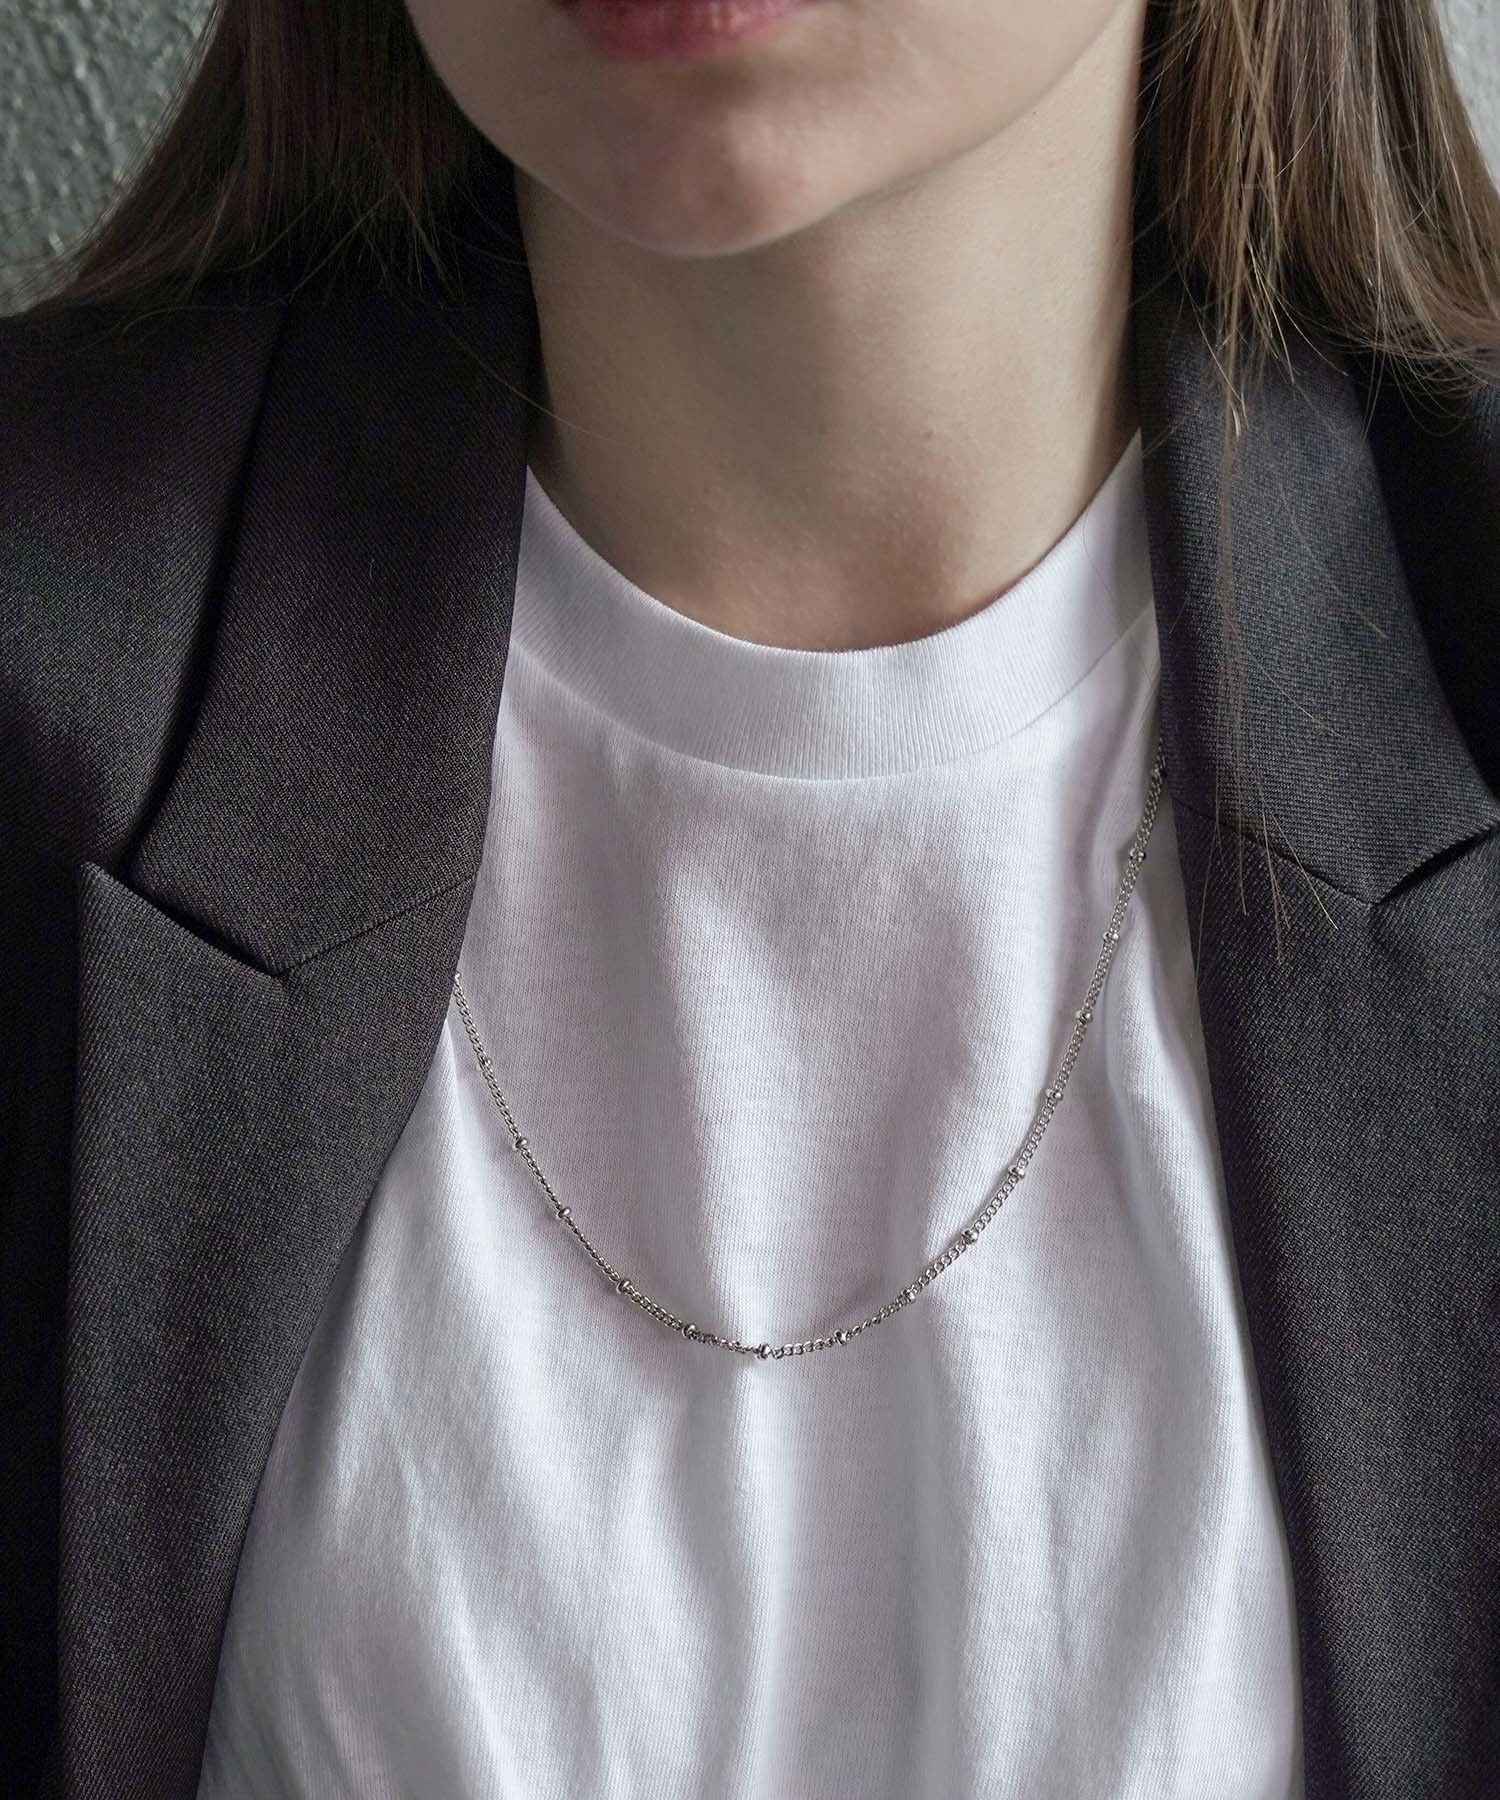 ital. from JUNRed / dot necklace | JUNRed